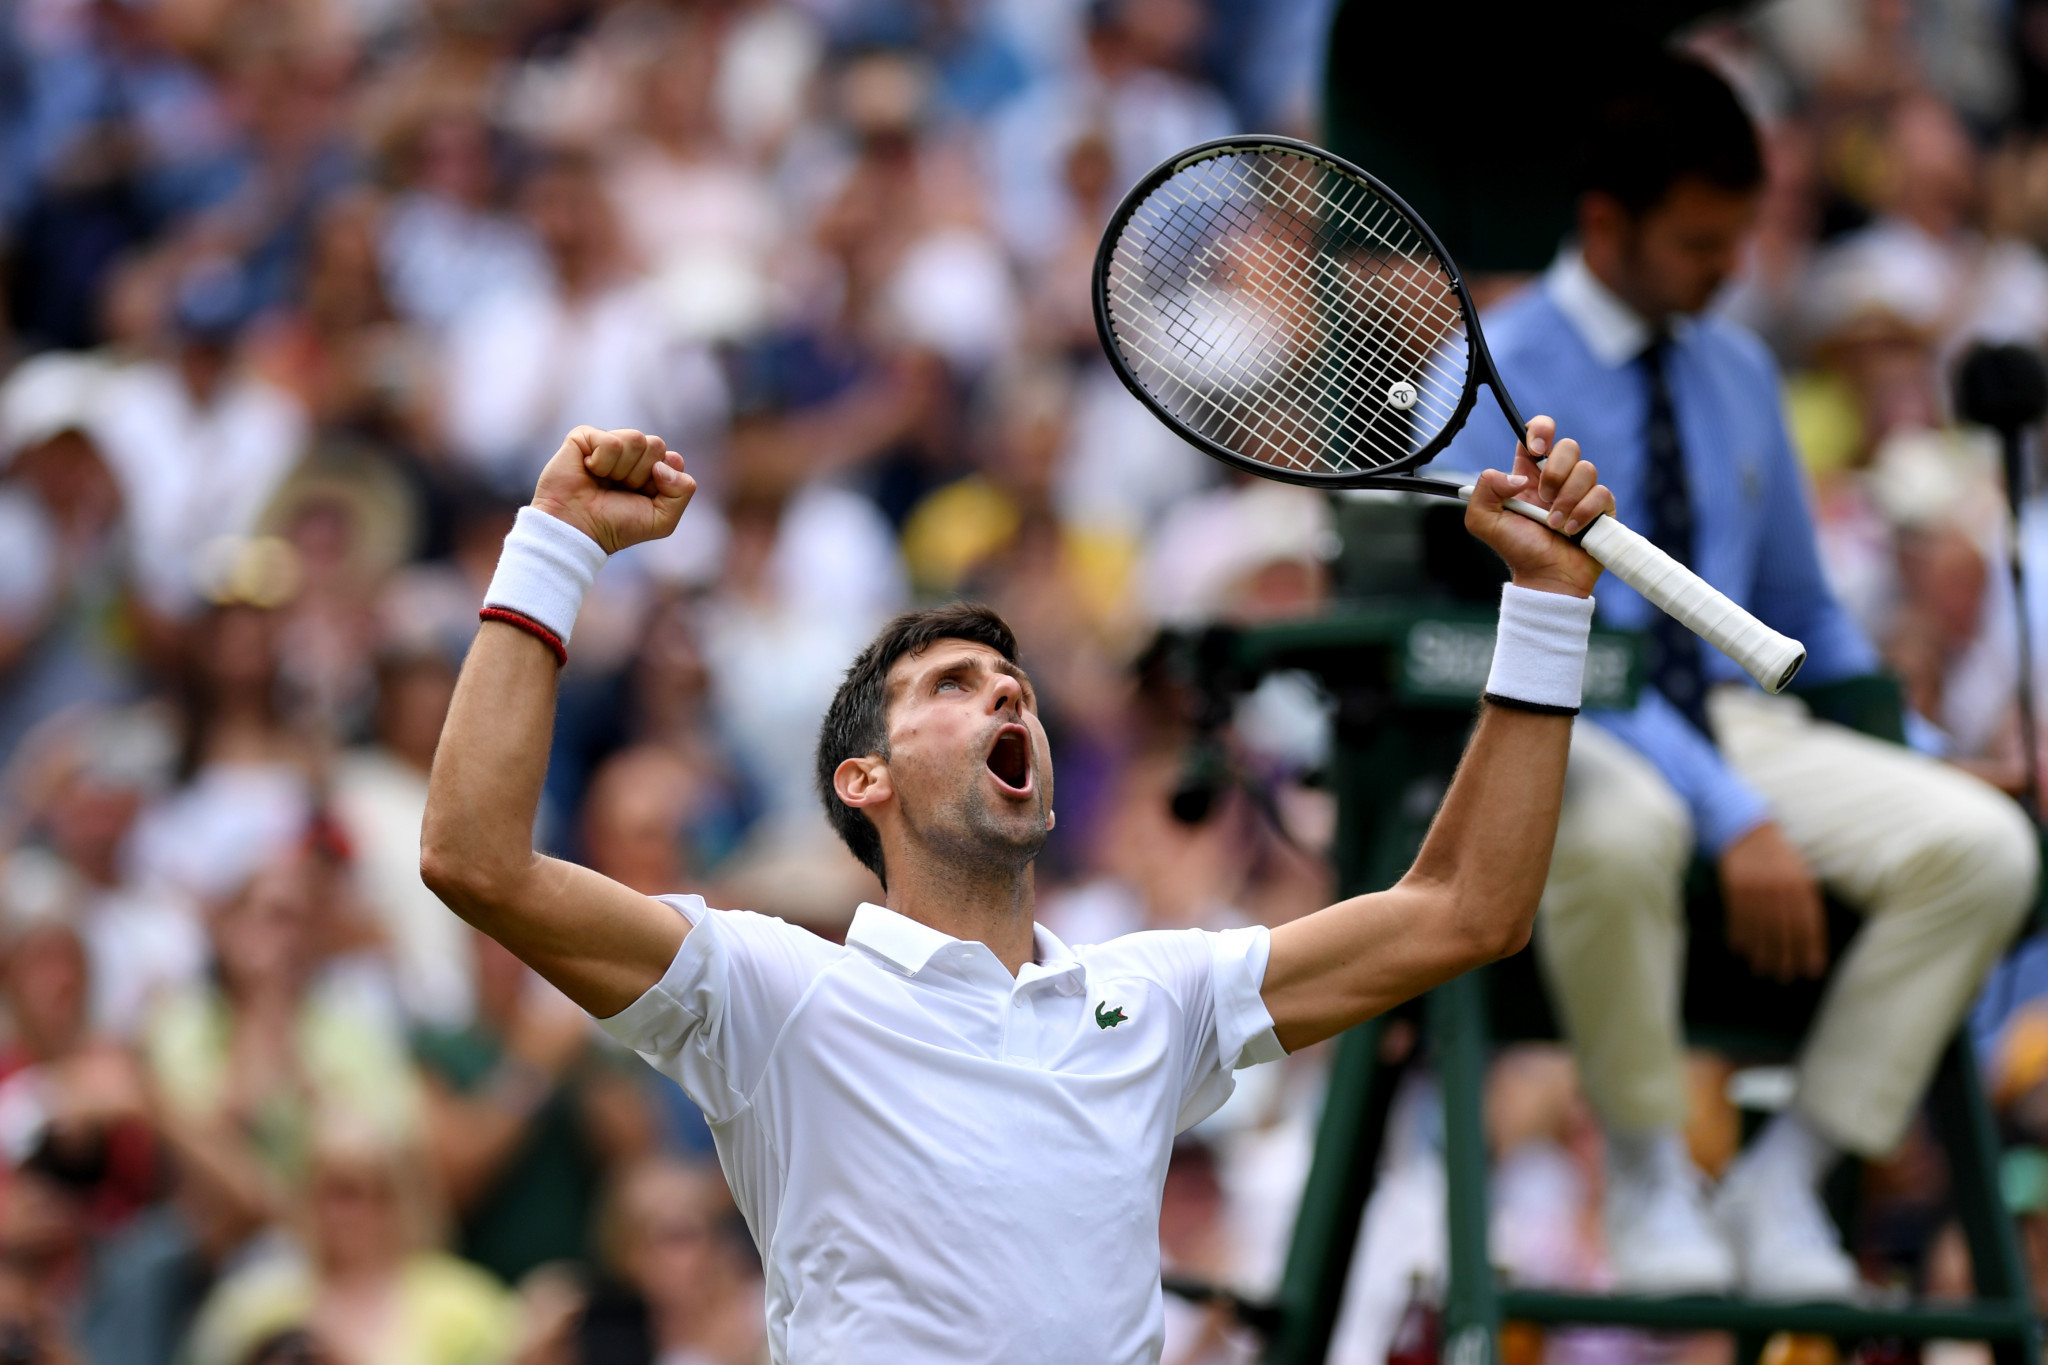 The Serbian world number one is now just two wins away from a fifth Wimbledon title and 16th Grand Slam ©Getty Images